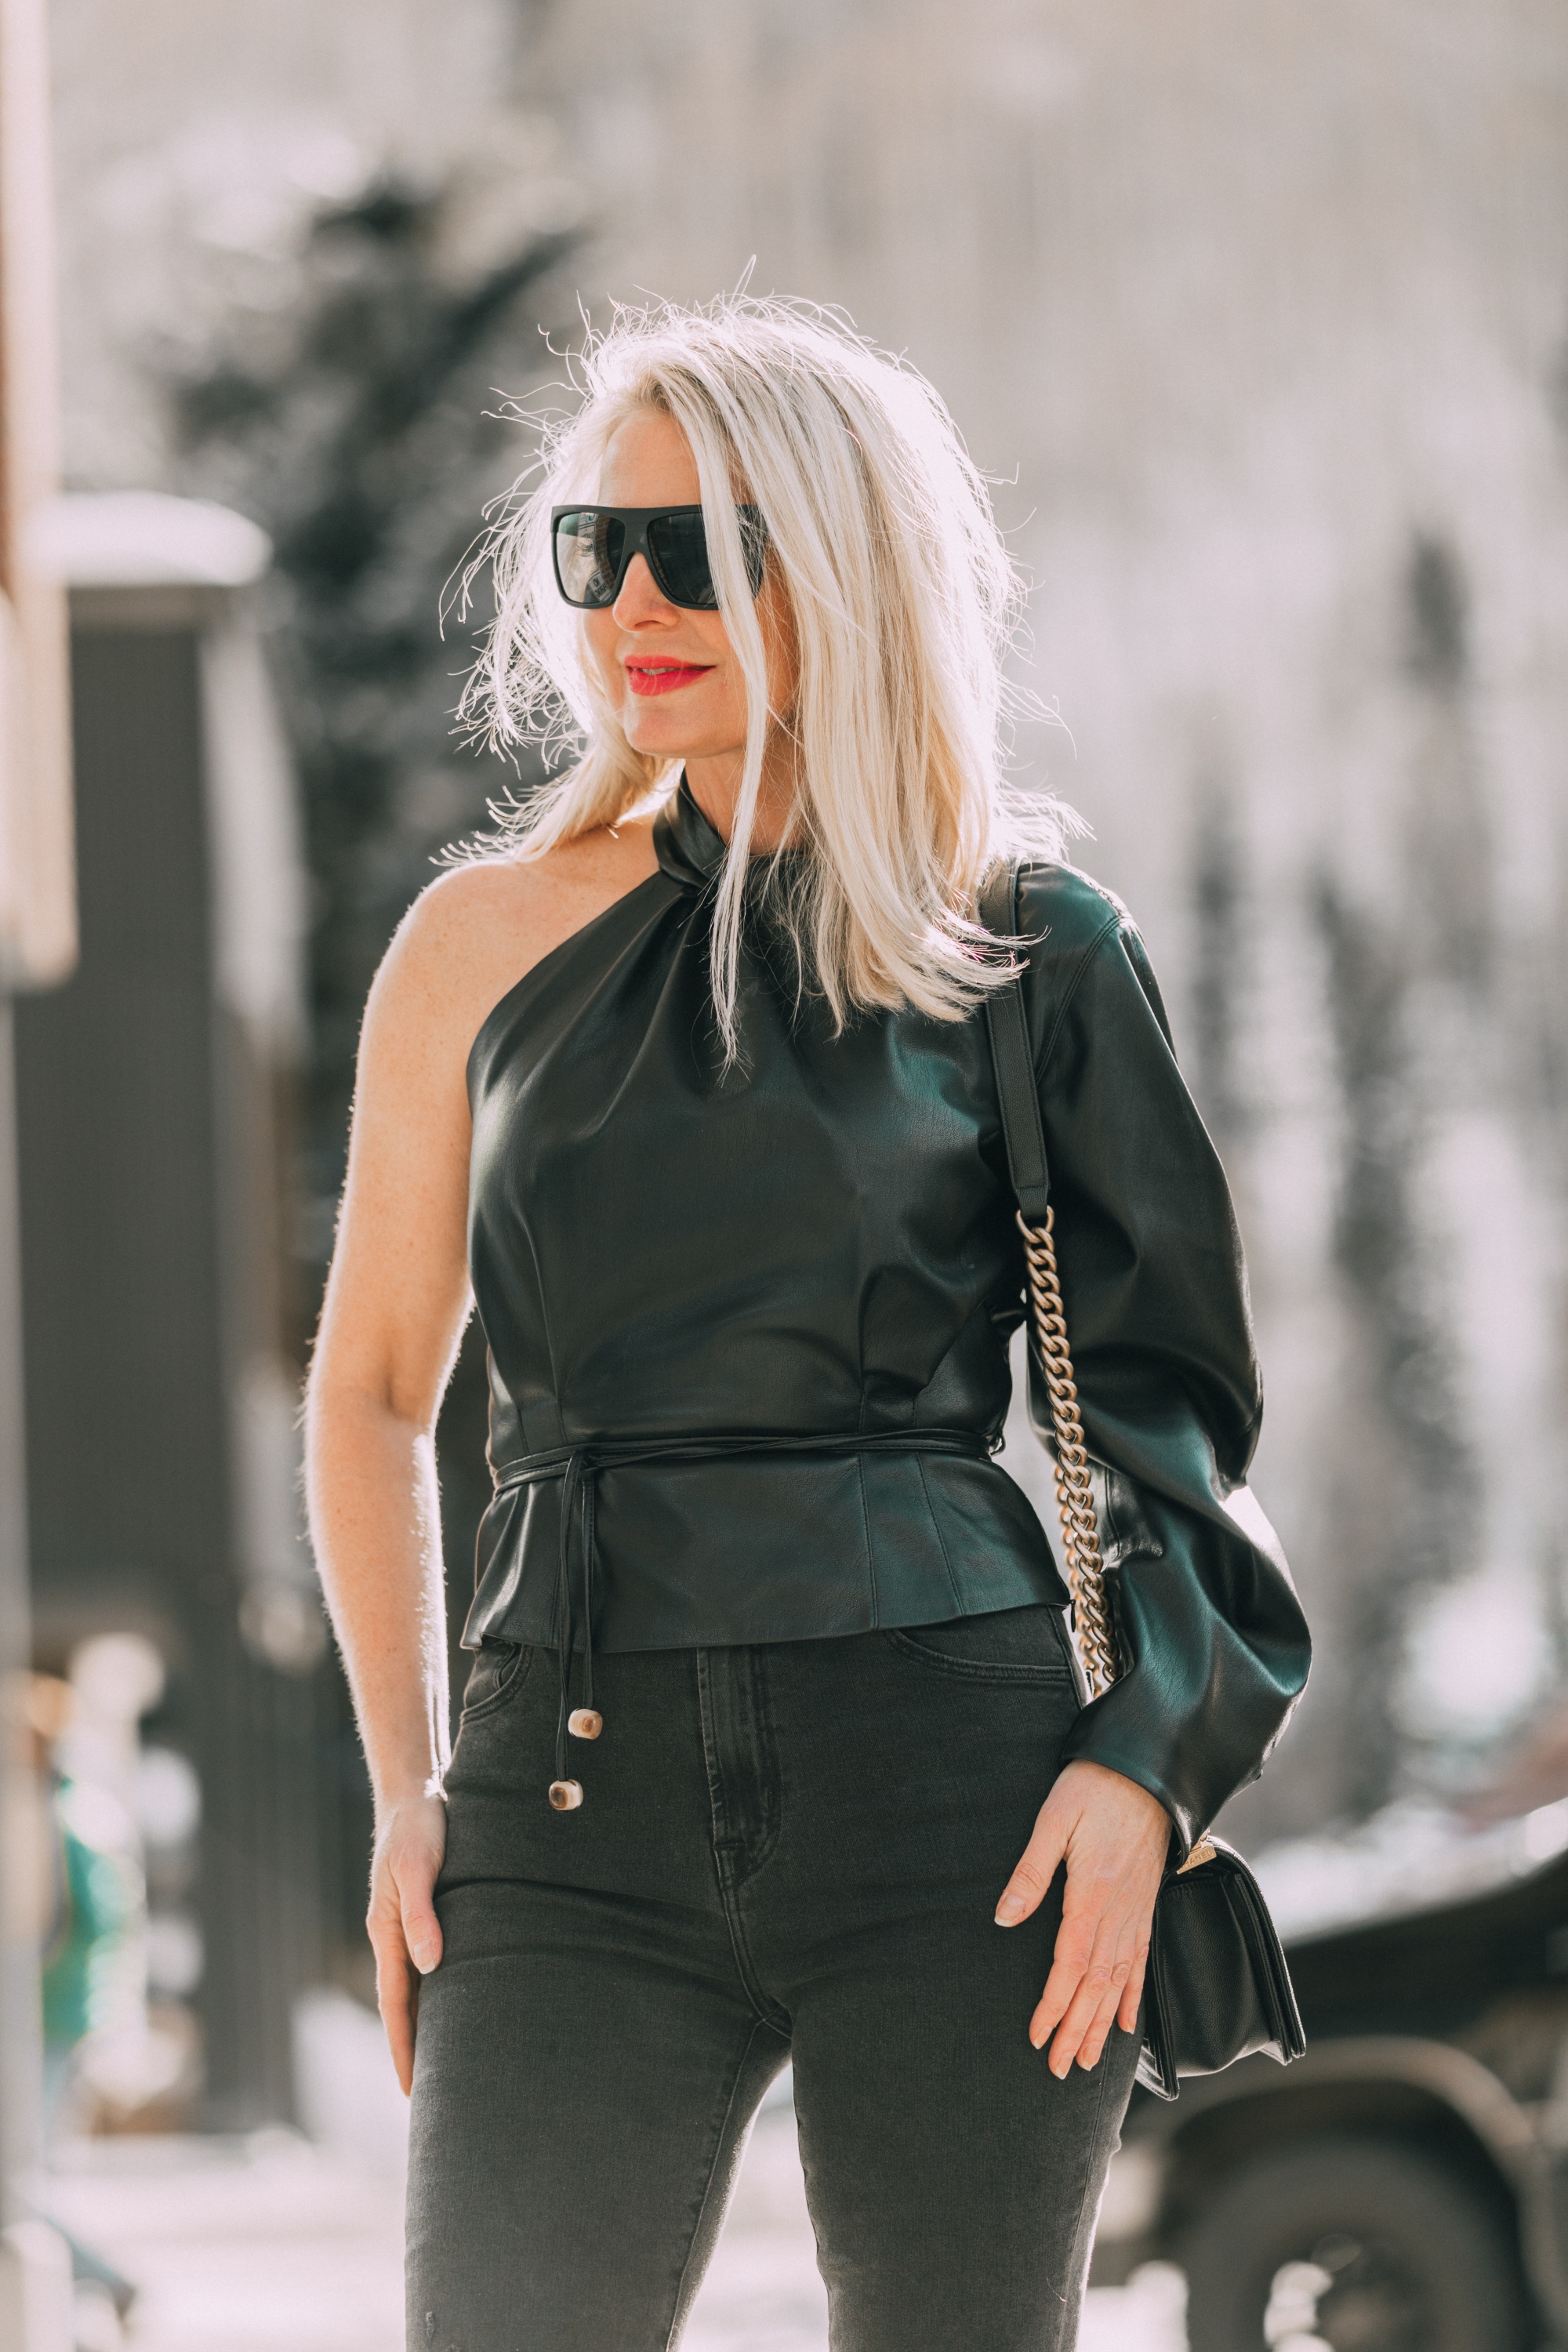 Date Night Outfits, Fashion blogger Erin Busbee of BusbeeStyle.com wearing black minimally distressed jeans, Jimmy Choo pumps, and faux leather one shoulder top by Nanushka in Telluride, Colorado